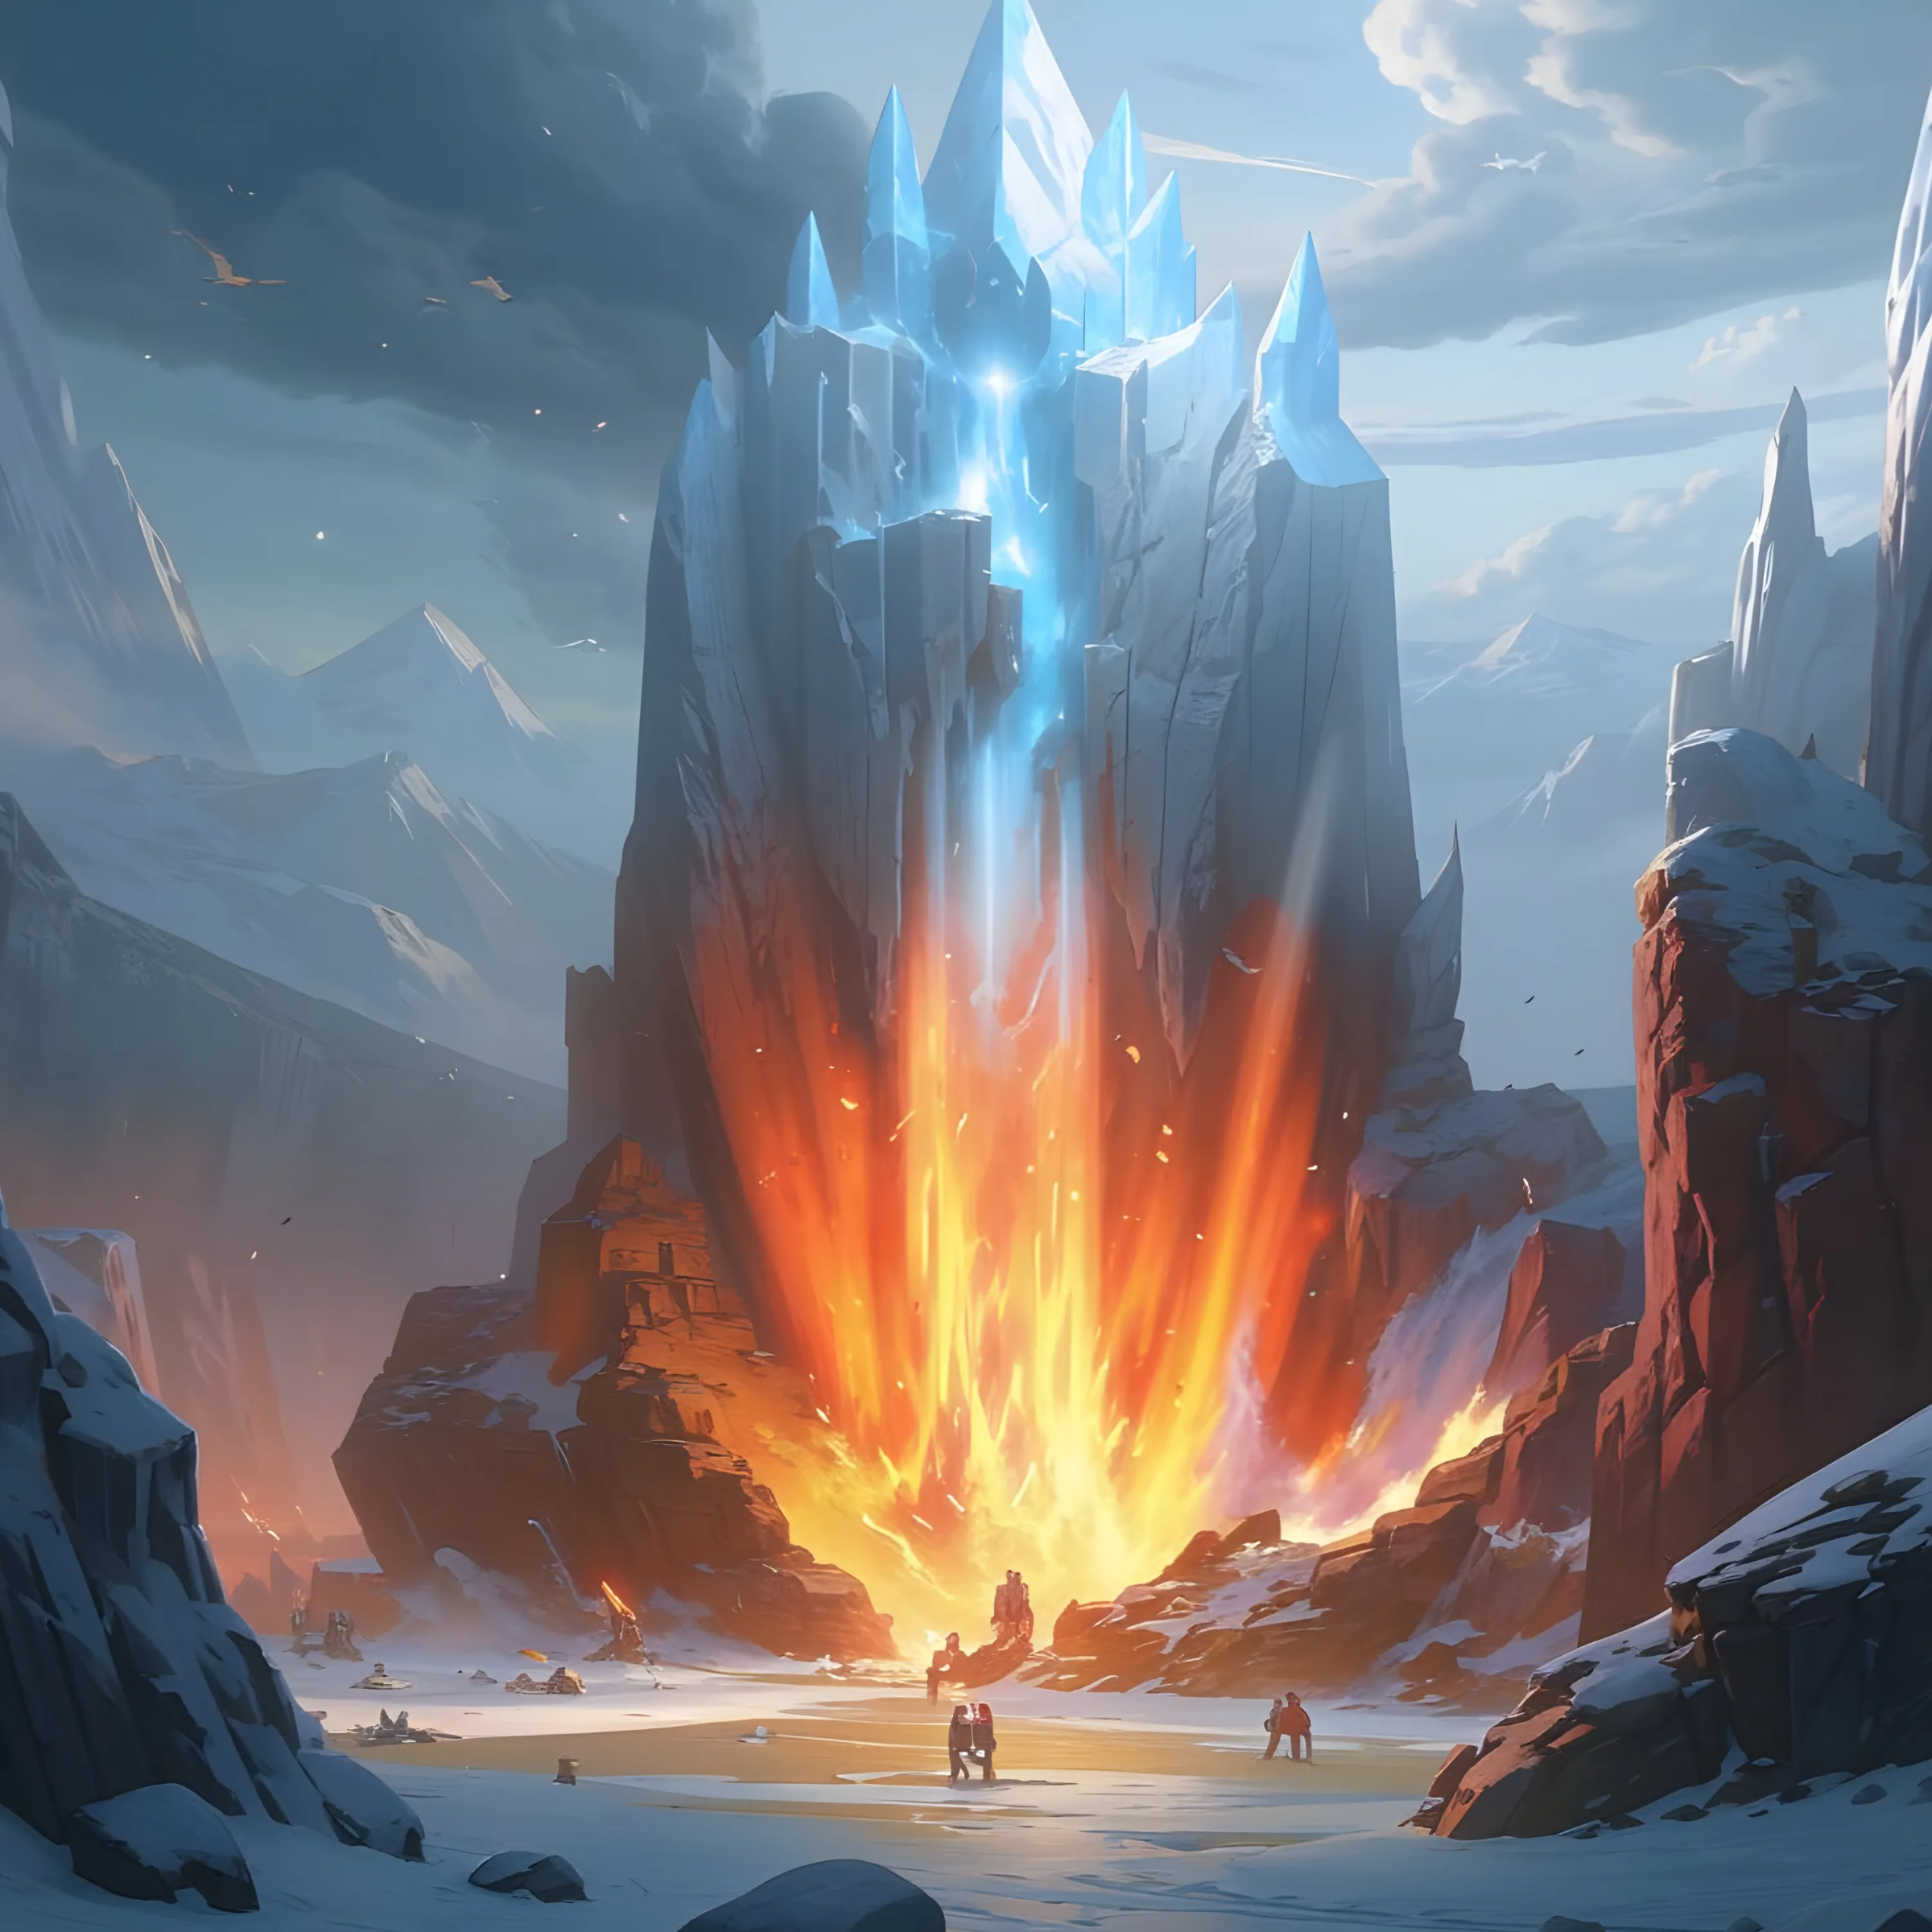 A world of ice and fire